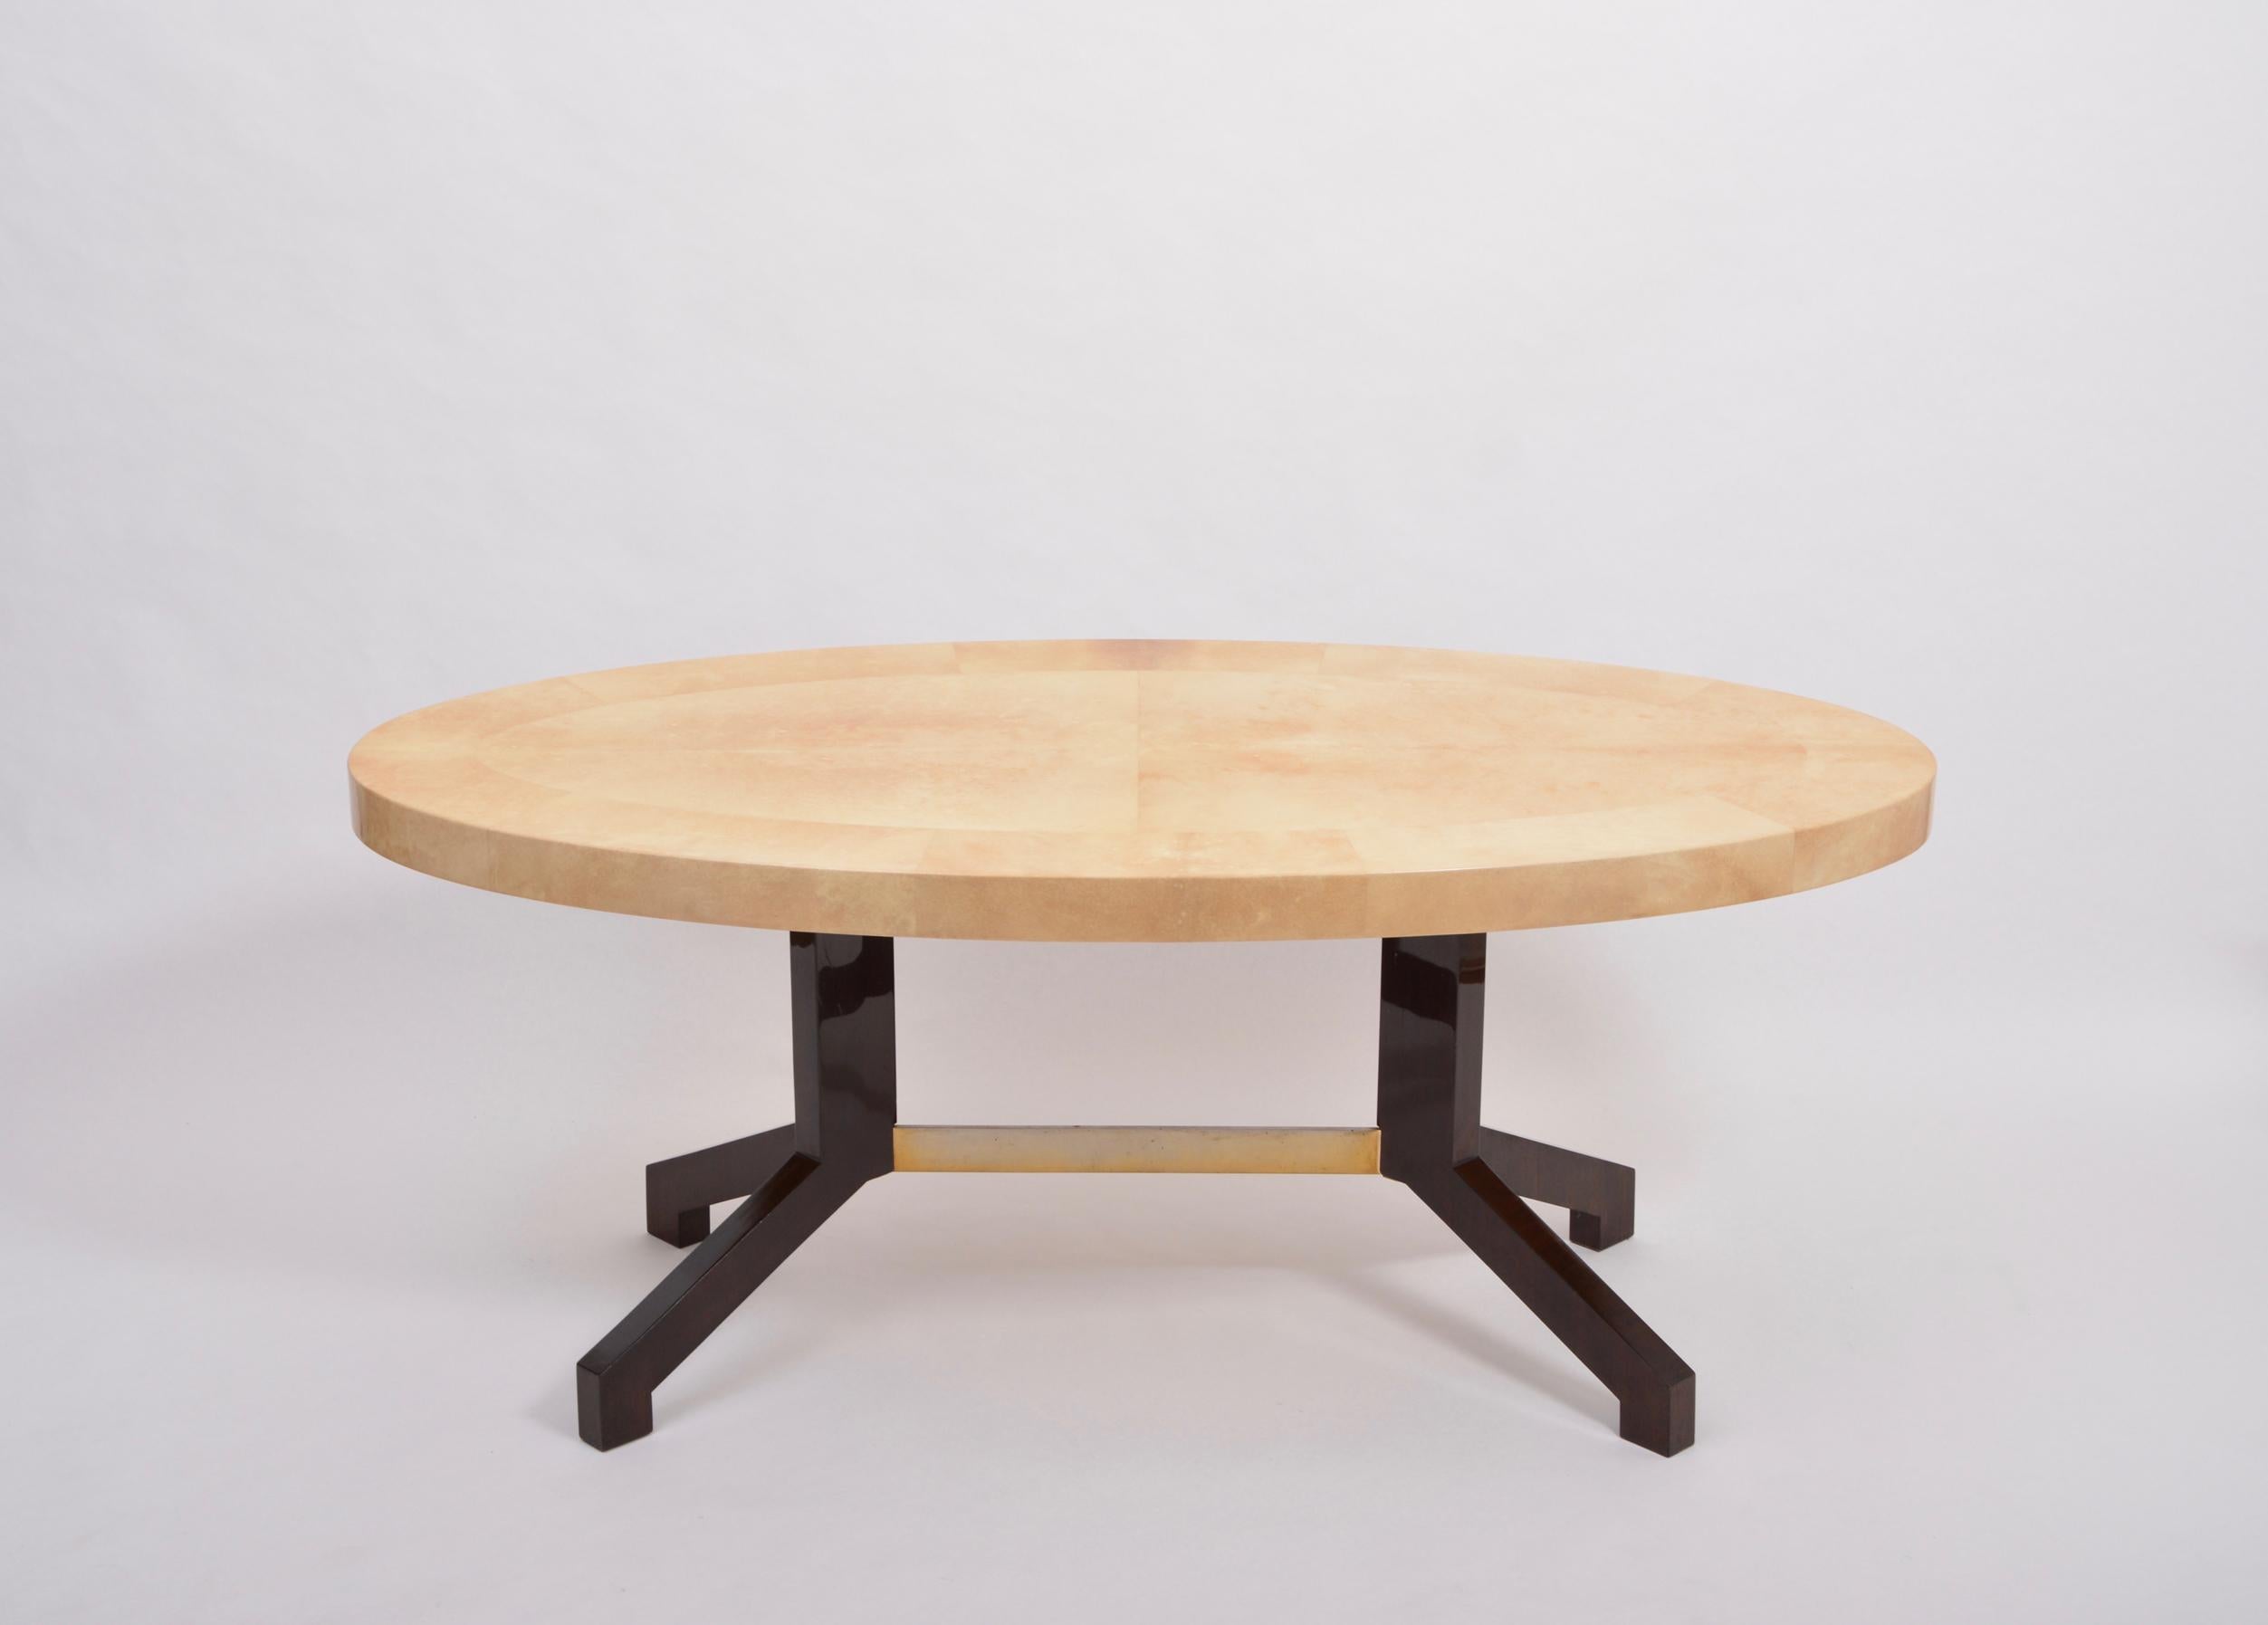 Oval dining table designed by Aldo Tura and produced in Italy in the 1970s. This dining table is a very strong example of his work, simple in form, with a soft curved oval top affixed to two mahogany feet connected with a metal bar. The ethereal